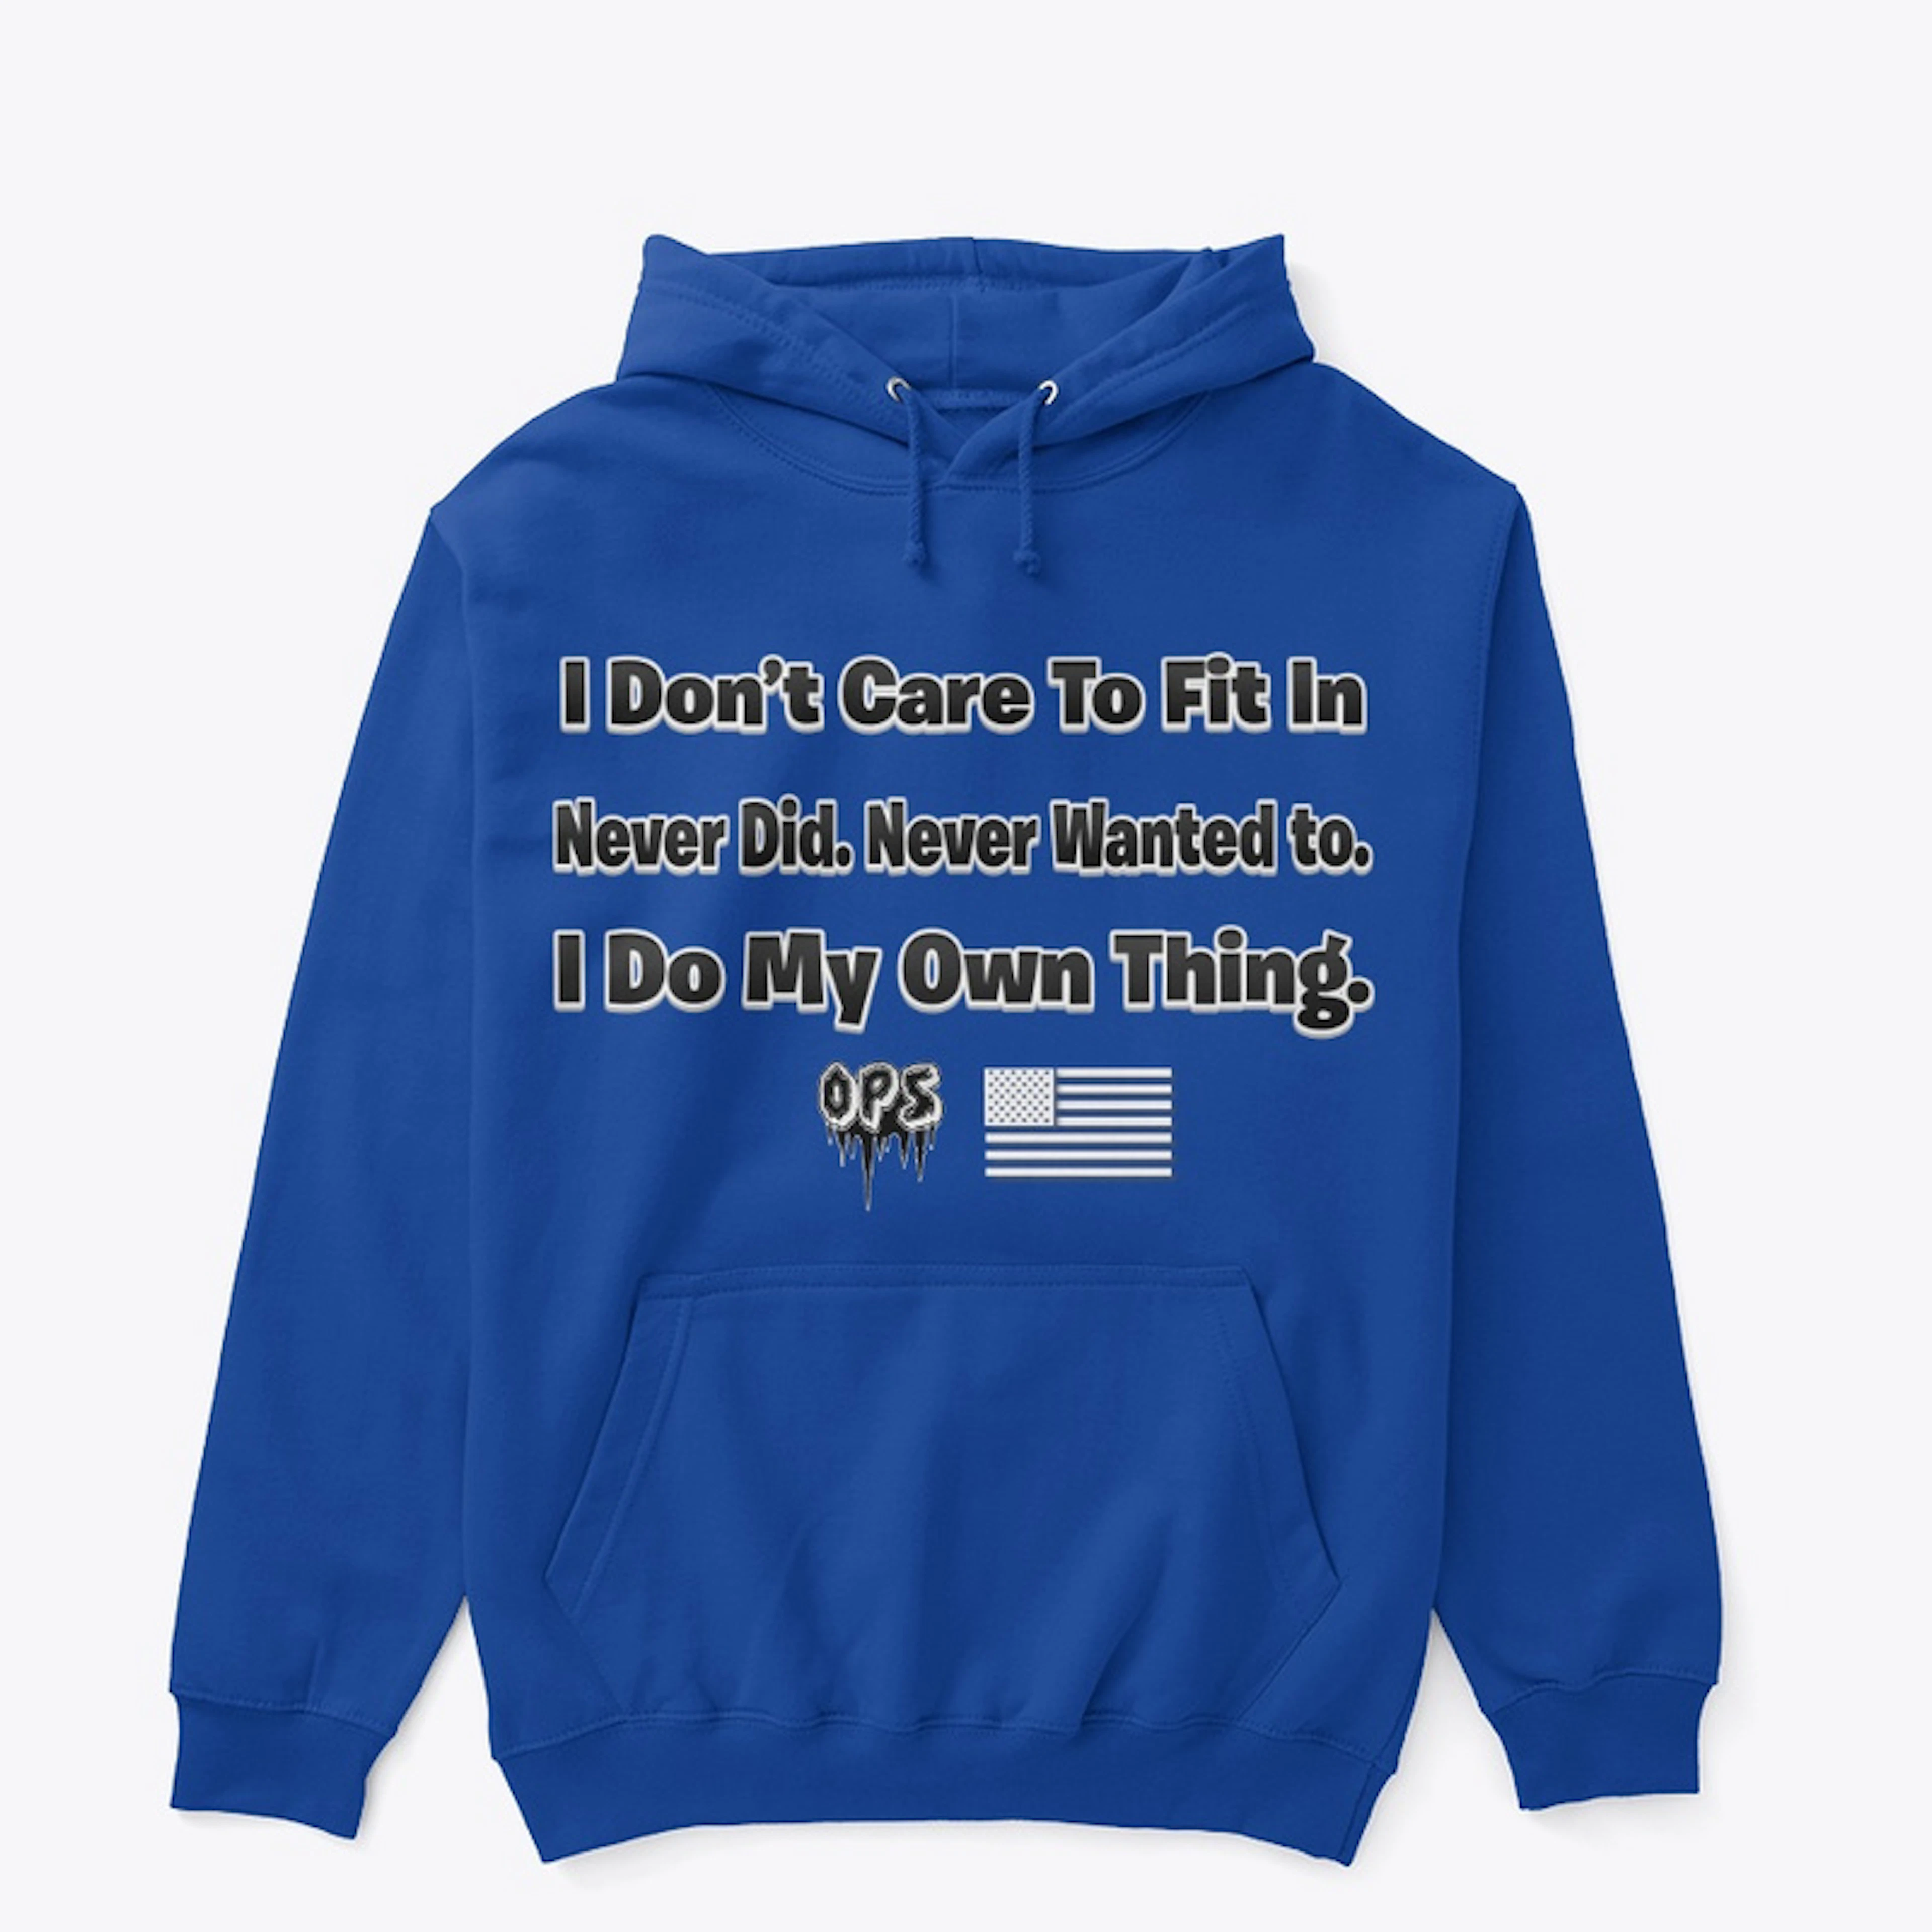 I do my own thing hoodie